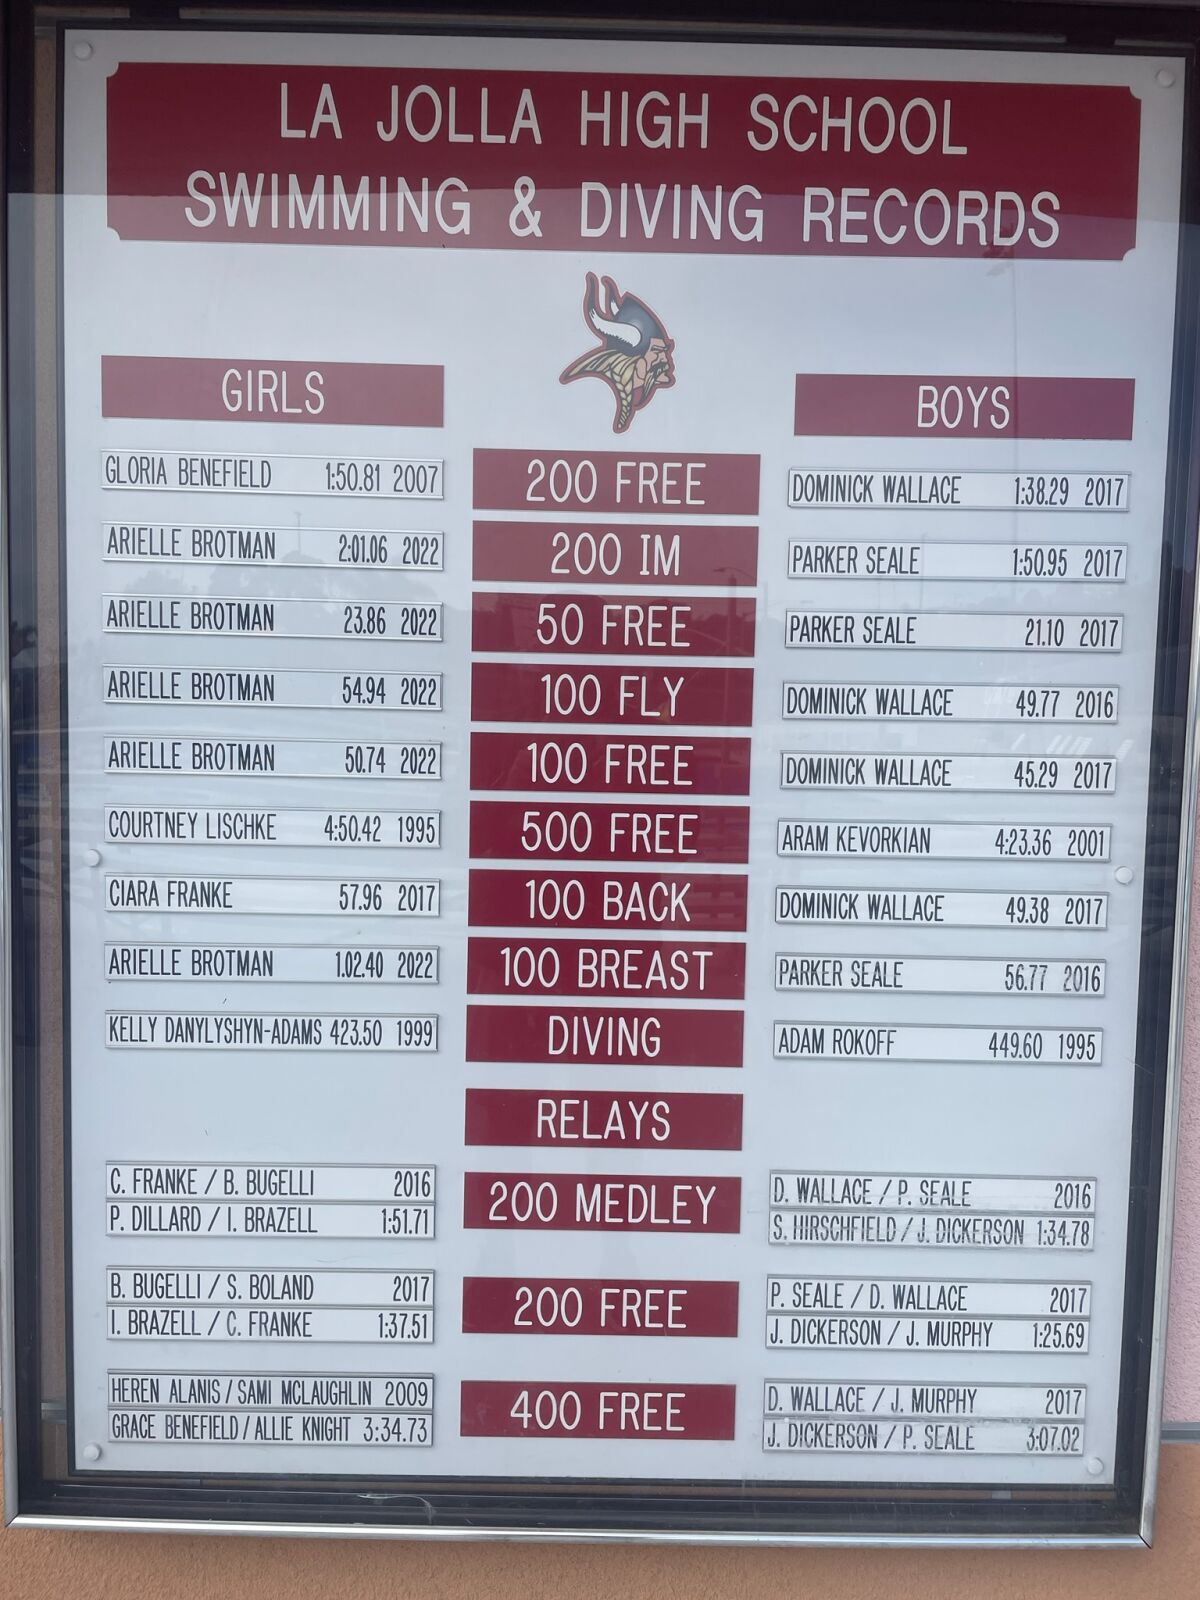 A list of La Jolla High School's current swimming and diving records includes five held by Arielle Brotman.